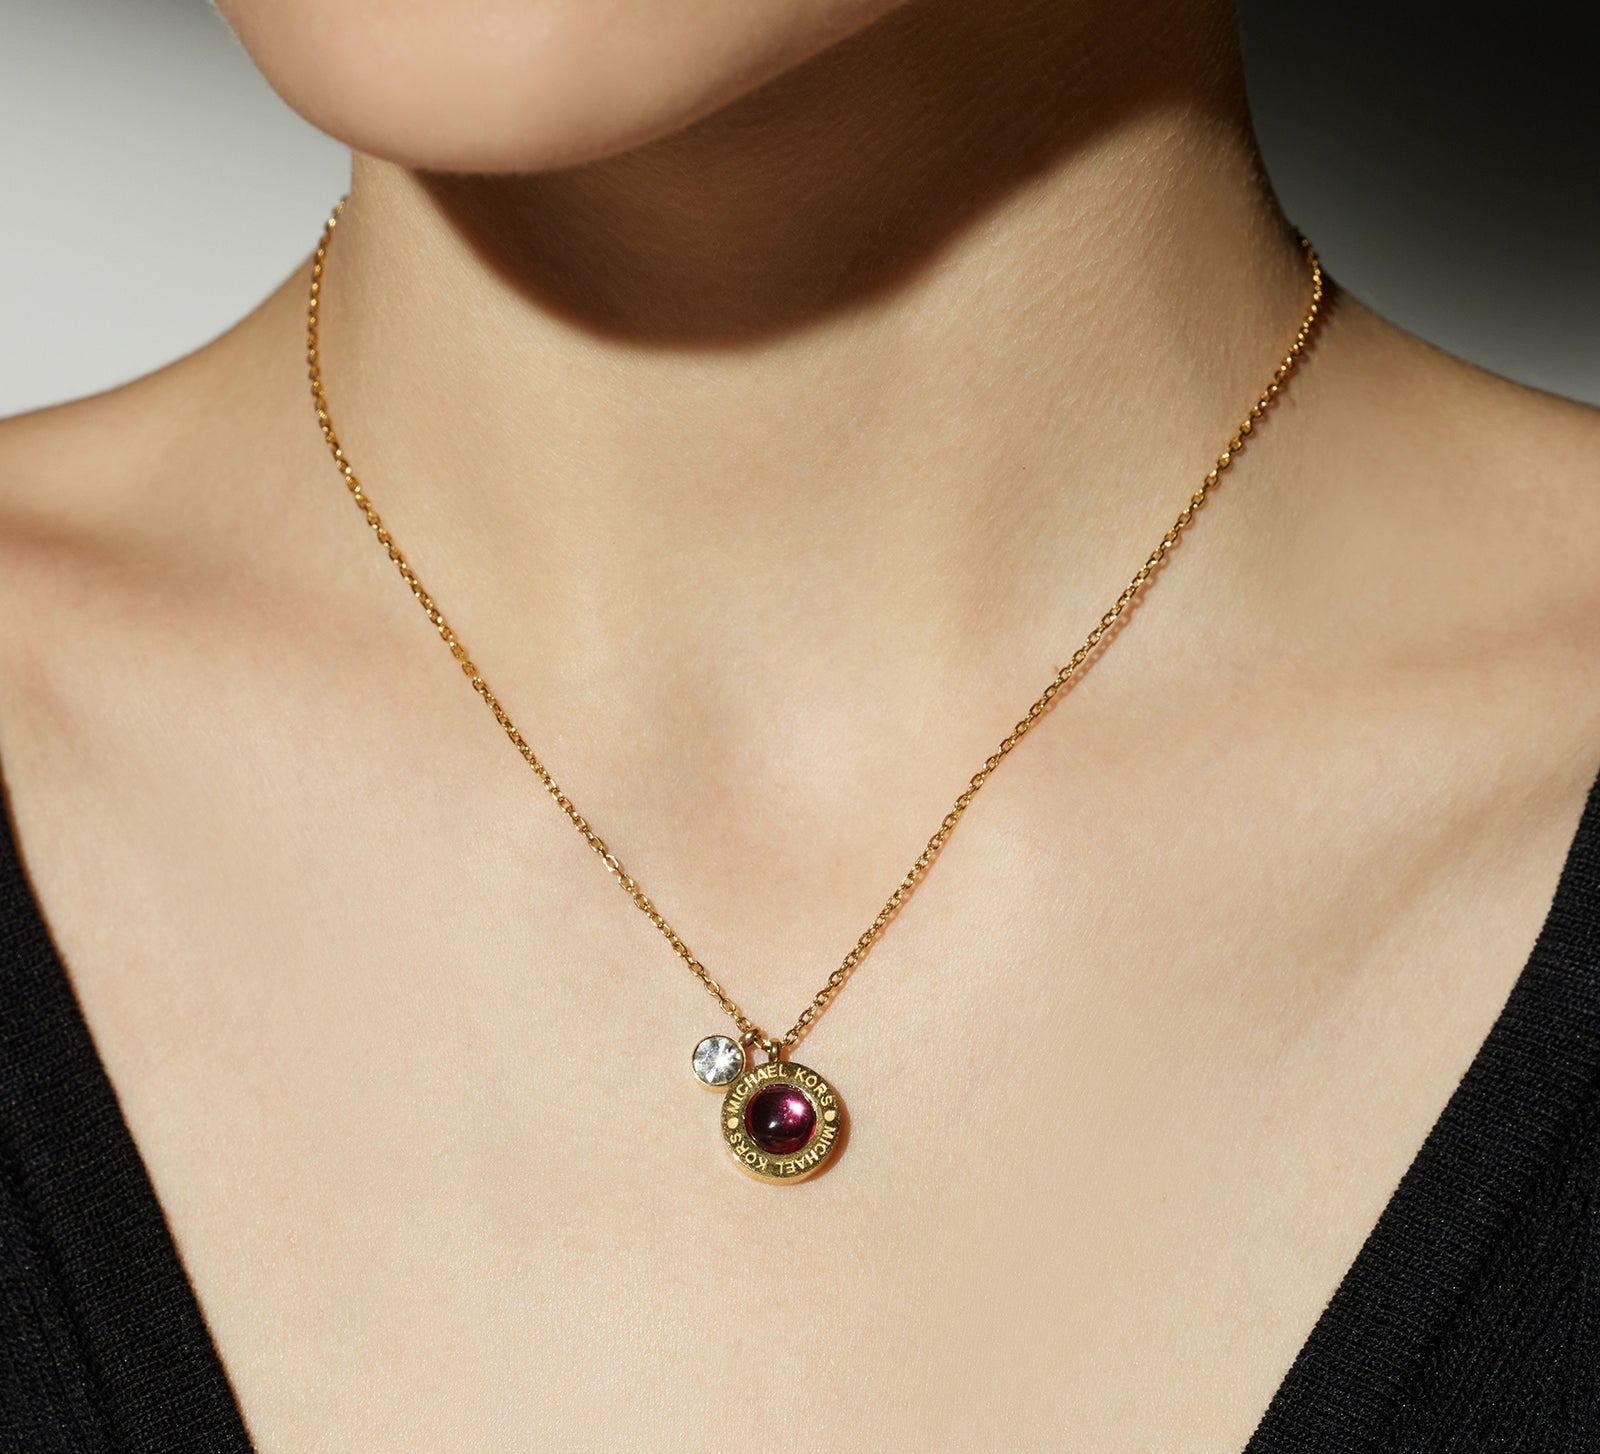 Red Crystal Dew Rose Gold Necklace, making a bold statement in red, this necklace showcases a striking red crystal dew pendant on a rose gold chain, adding a pop of color and vibrancy to your ensemble.